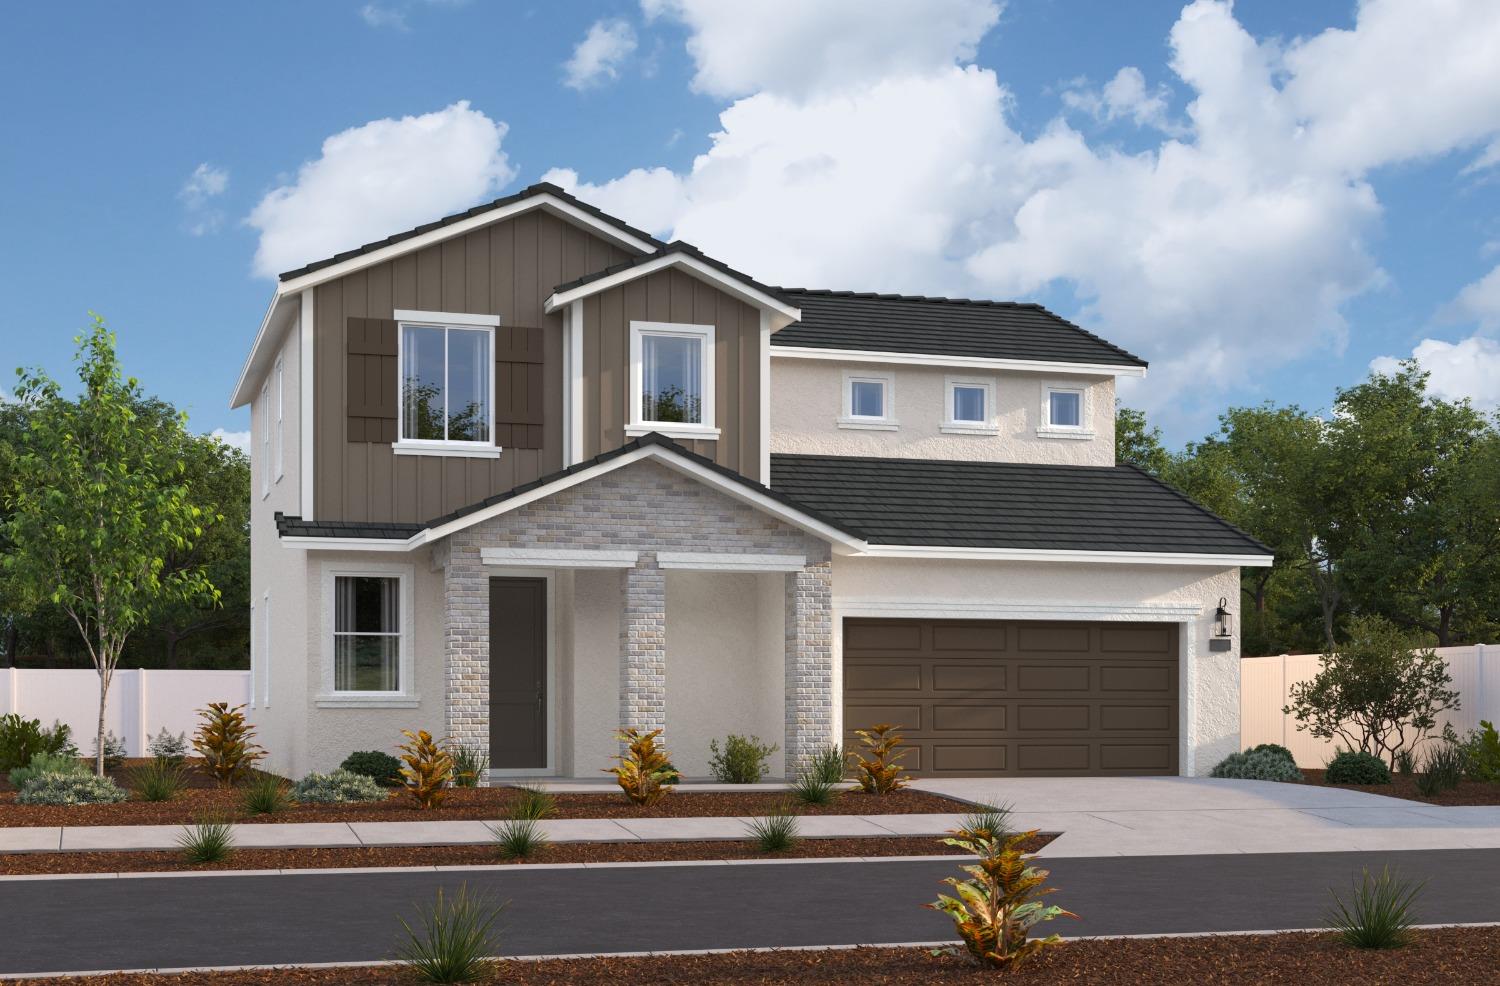 Charming Plan 1 at Oakwood at Folsom Ranch is currently under construction and estimated to be compl